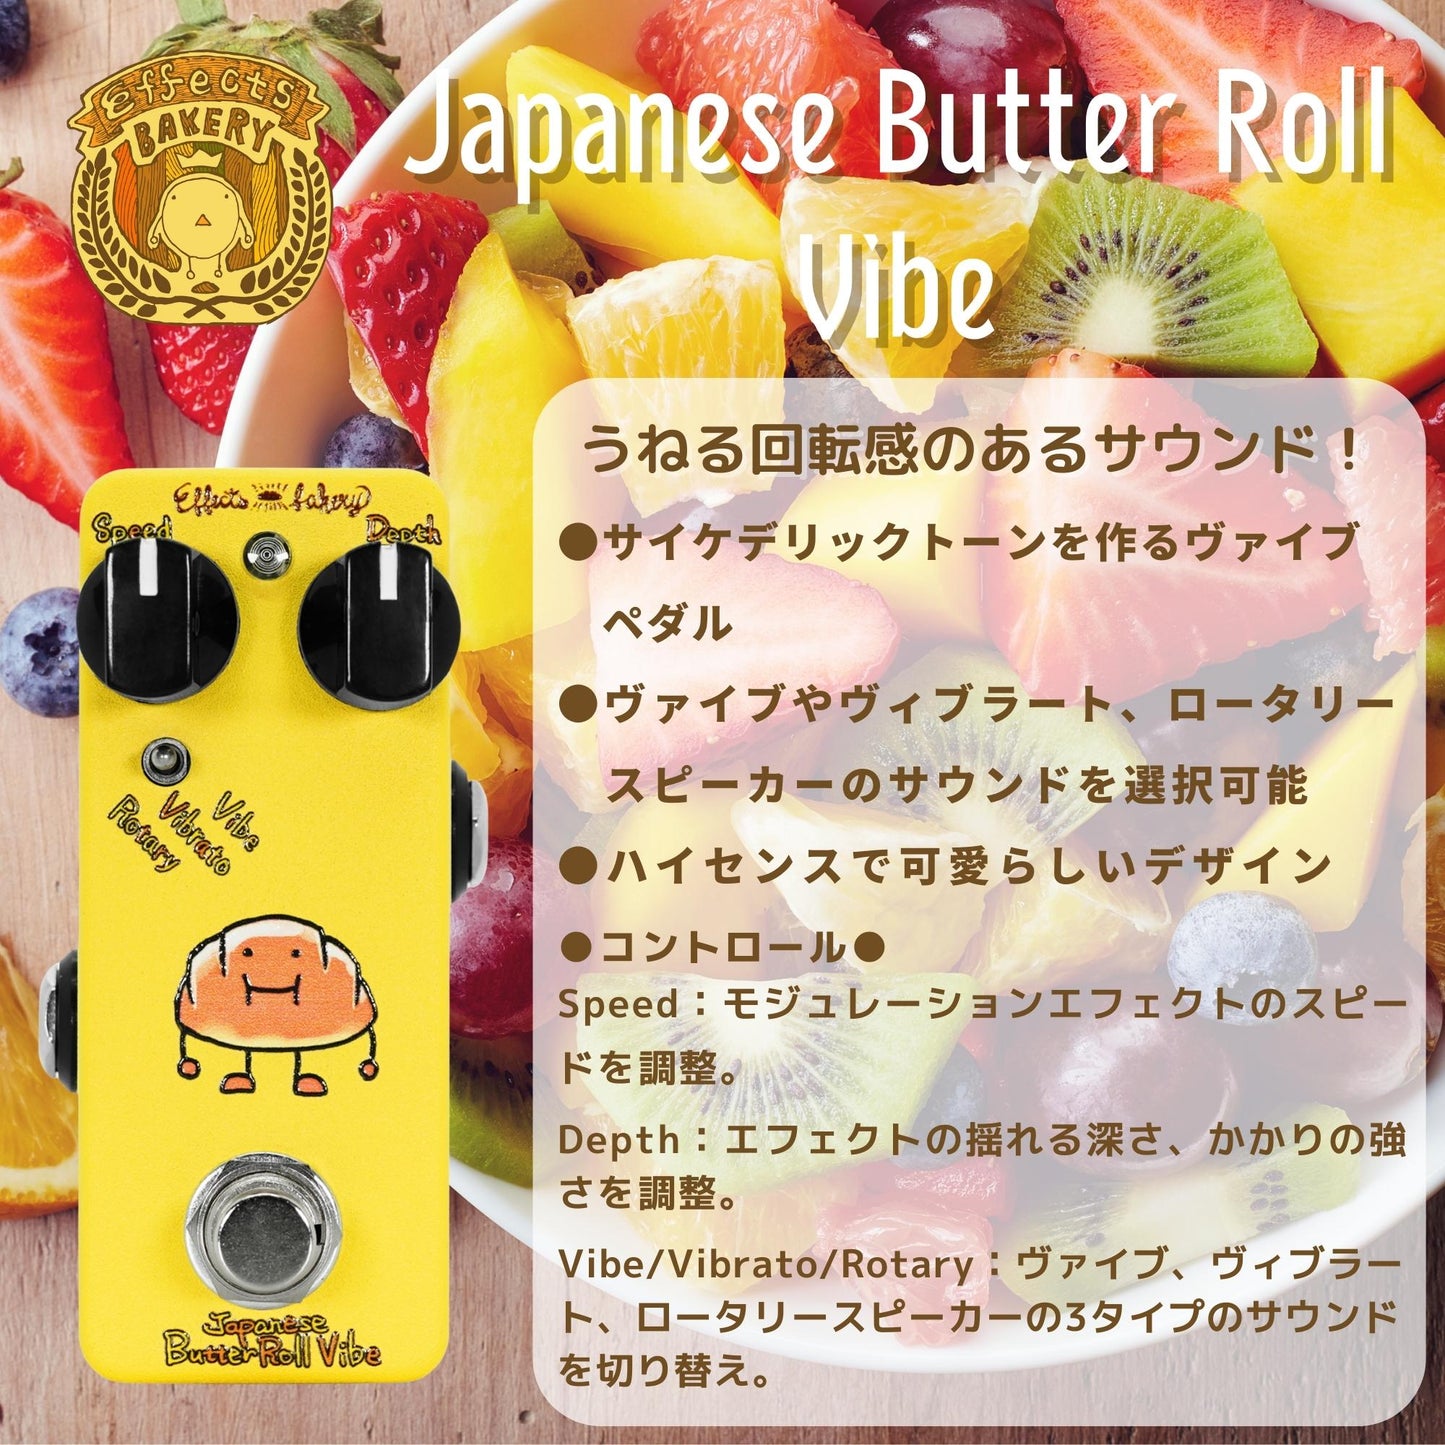 Effects Bakery  Japanese Butter Roll Vibe